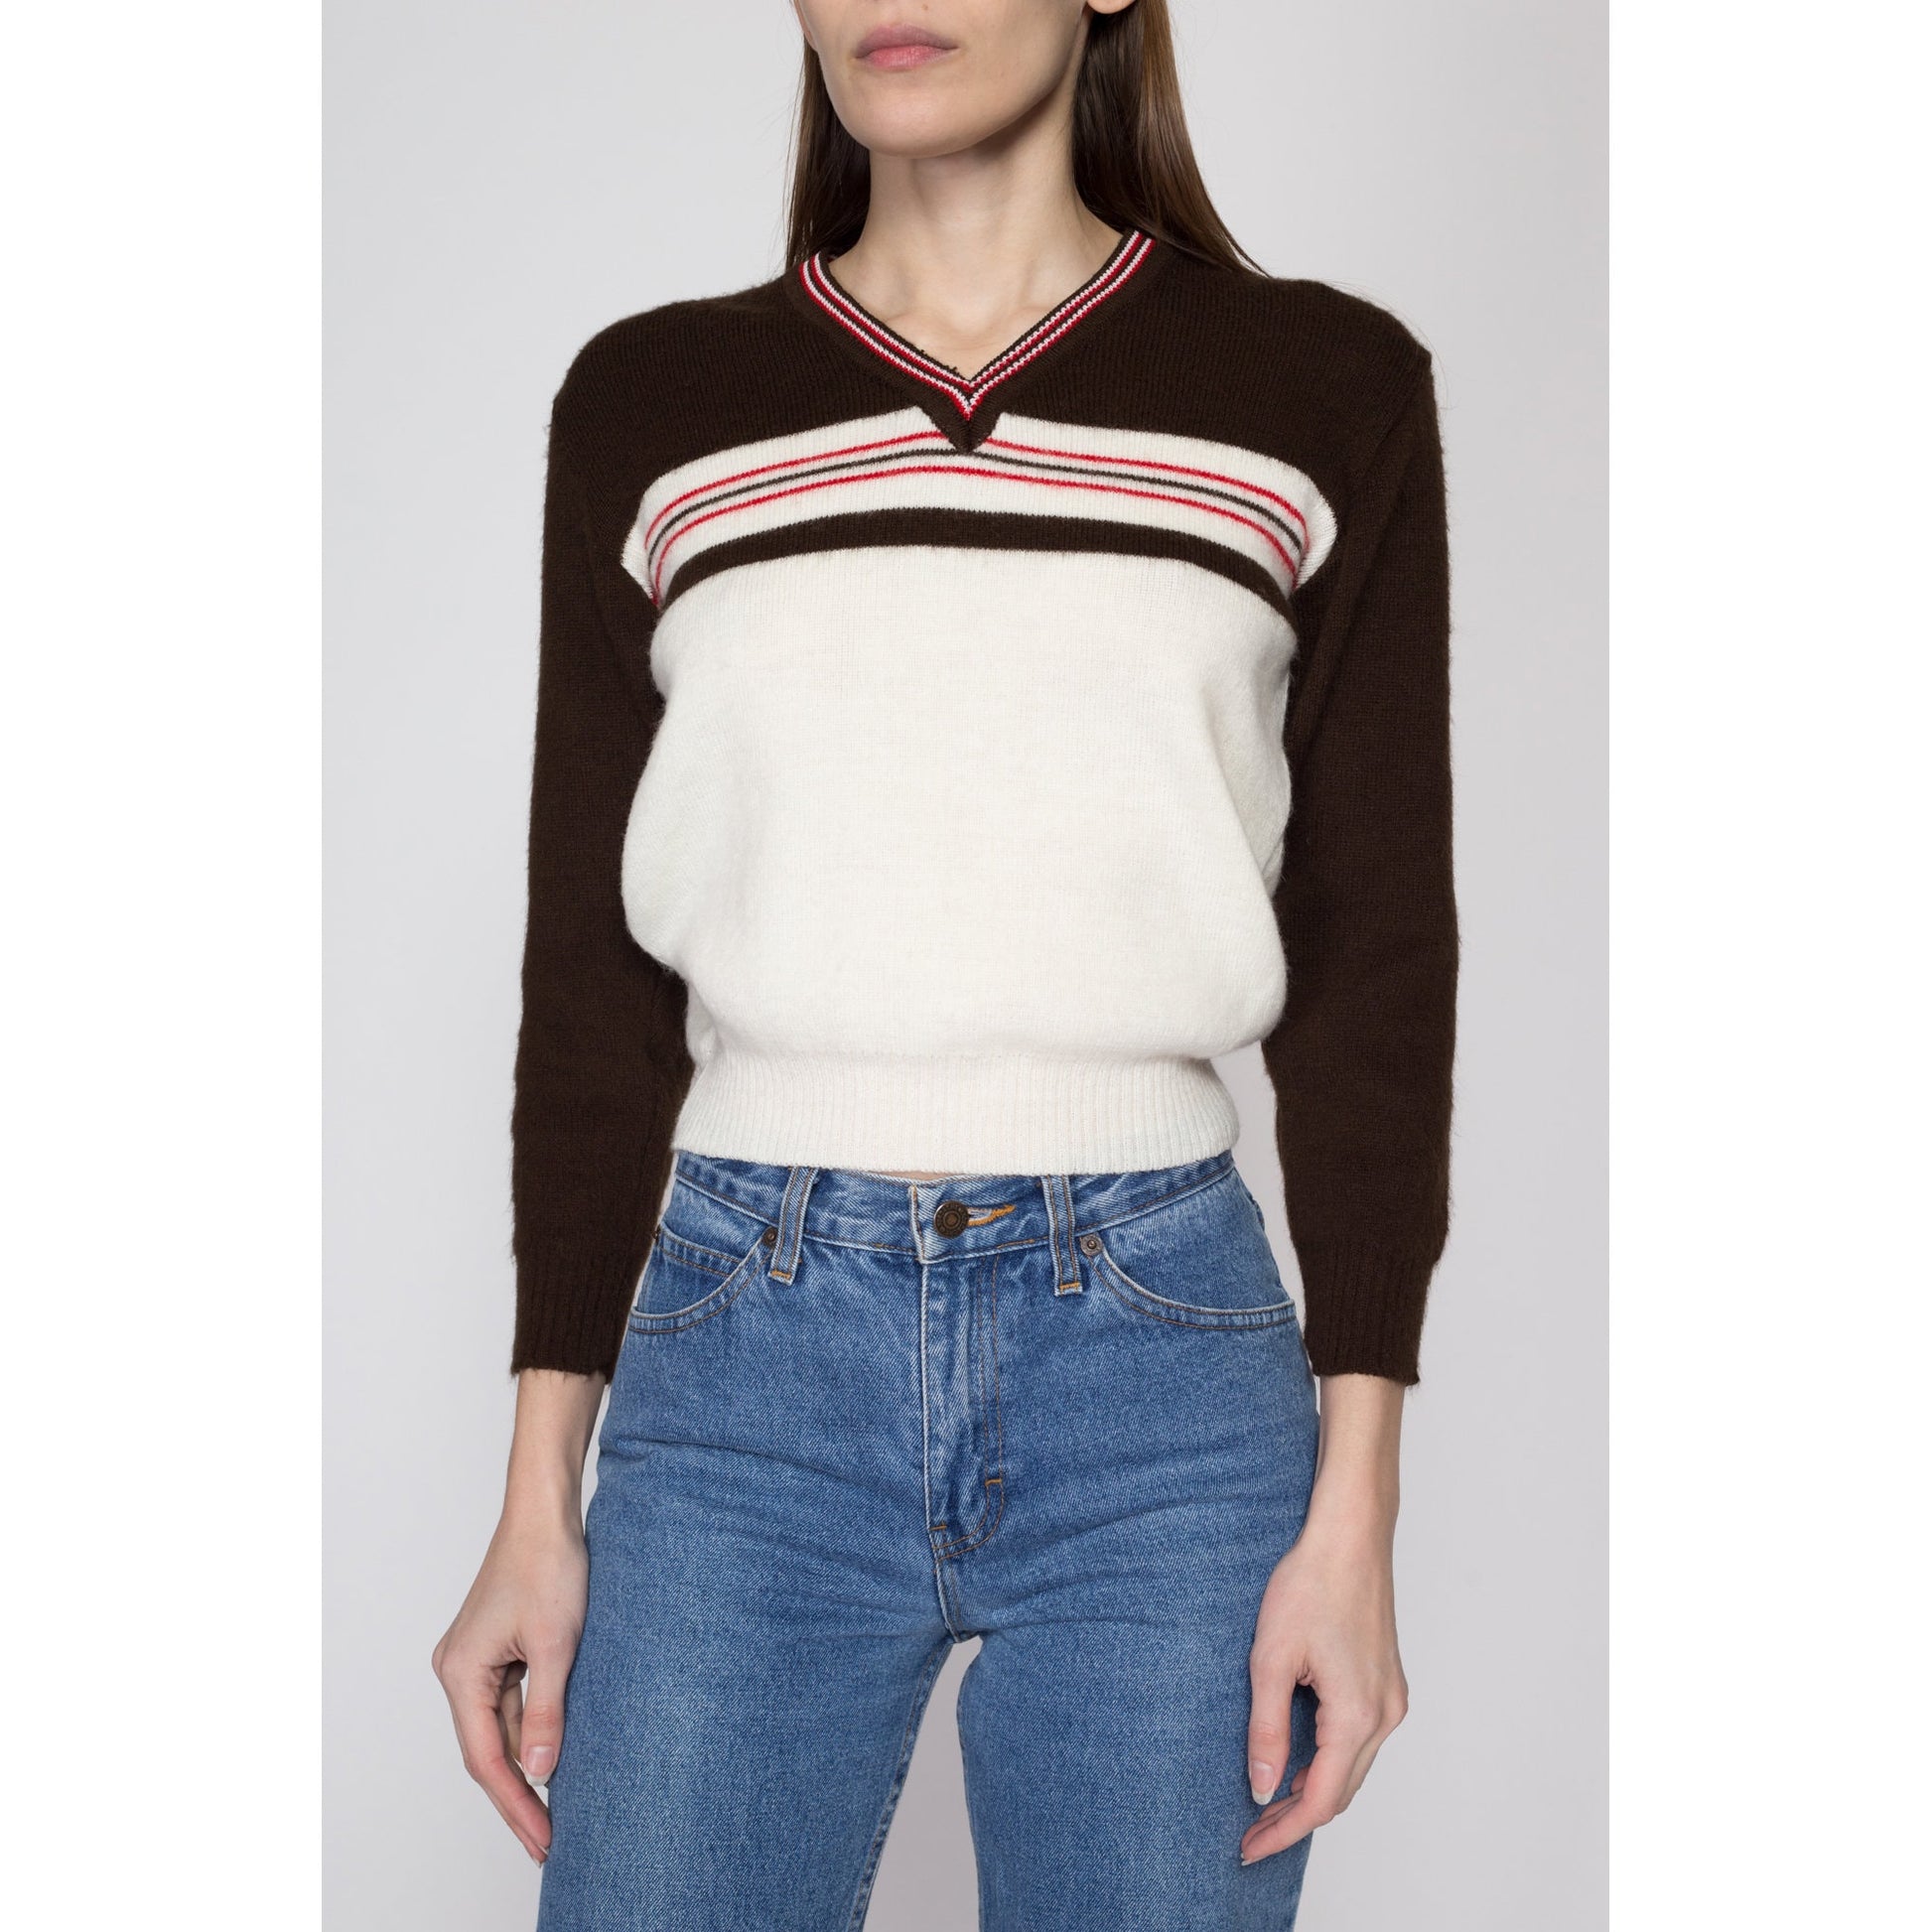 Small 70s Brown & White Striped Knit Cropped Sweater | Vintage Cropped V Neck Pullover Top